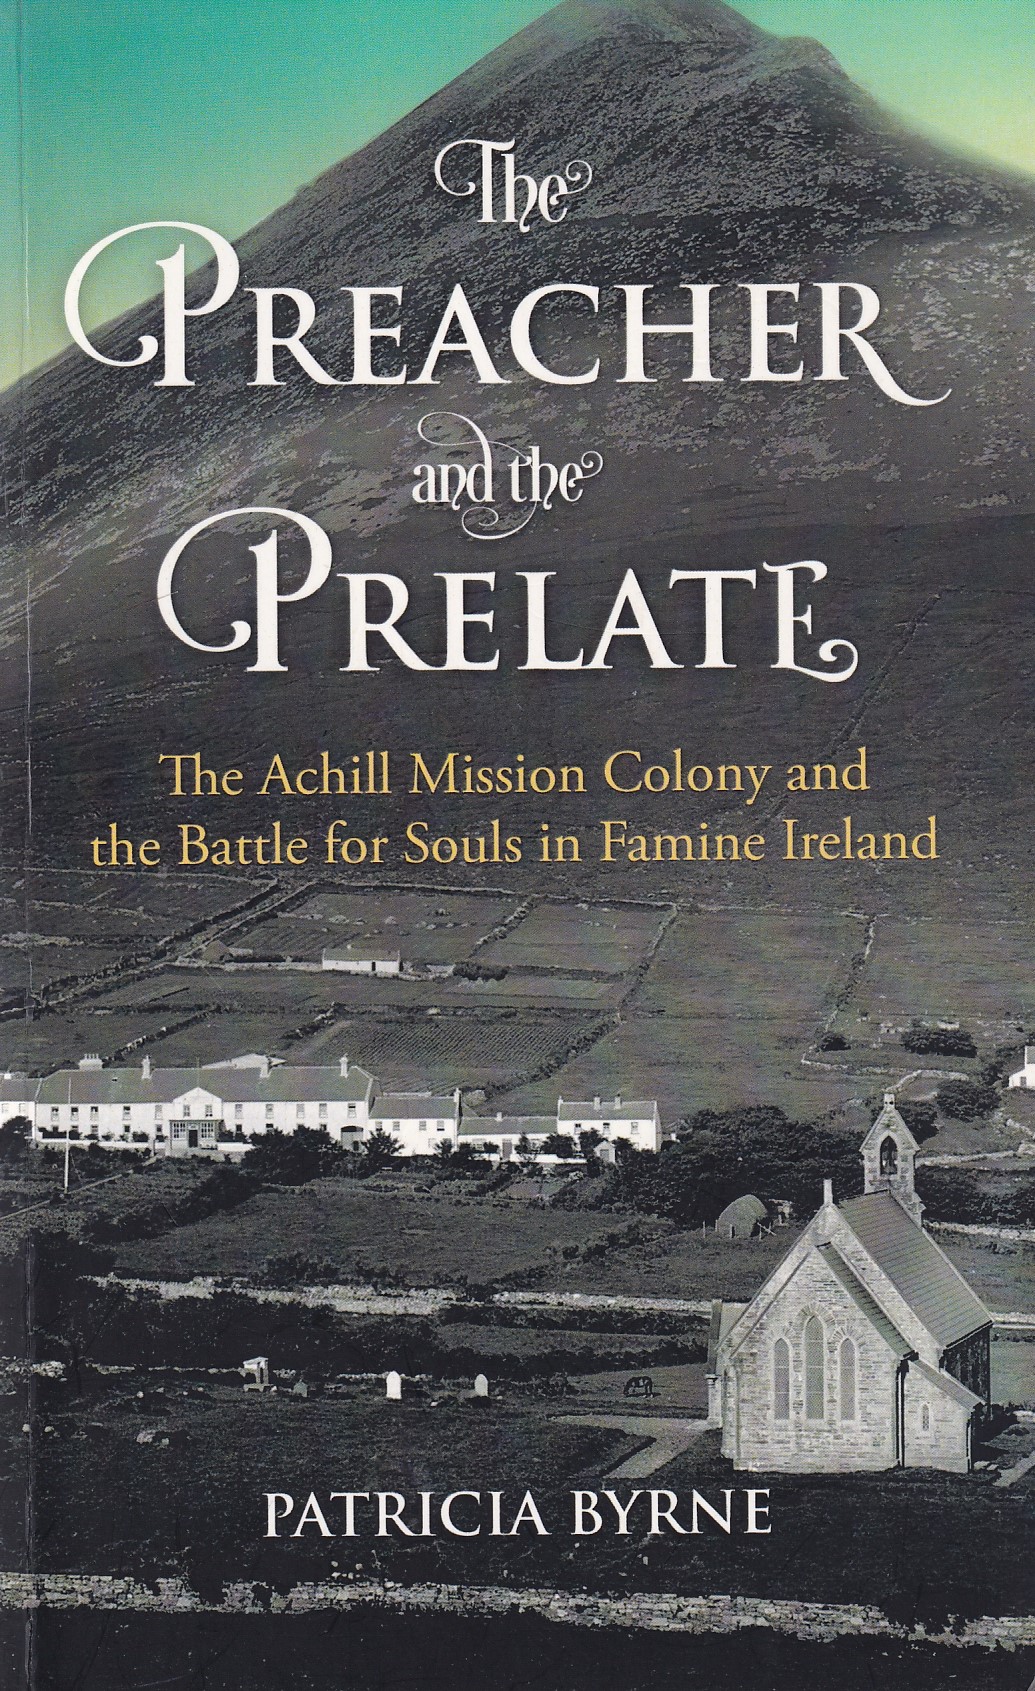 The Preacher and the Prelate: The Achill Mission Colony and the Battle for Souls in Famine Ireland [Signed] | Patricia Byrne | Charlie Byrne's